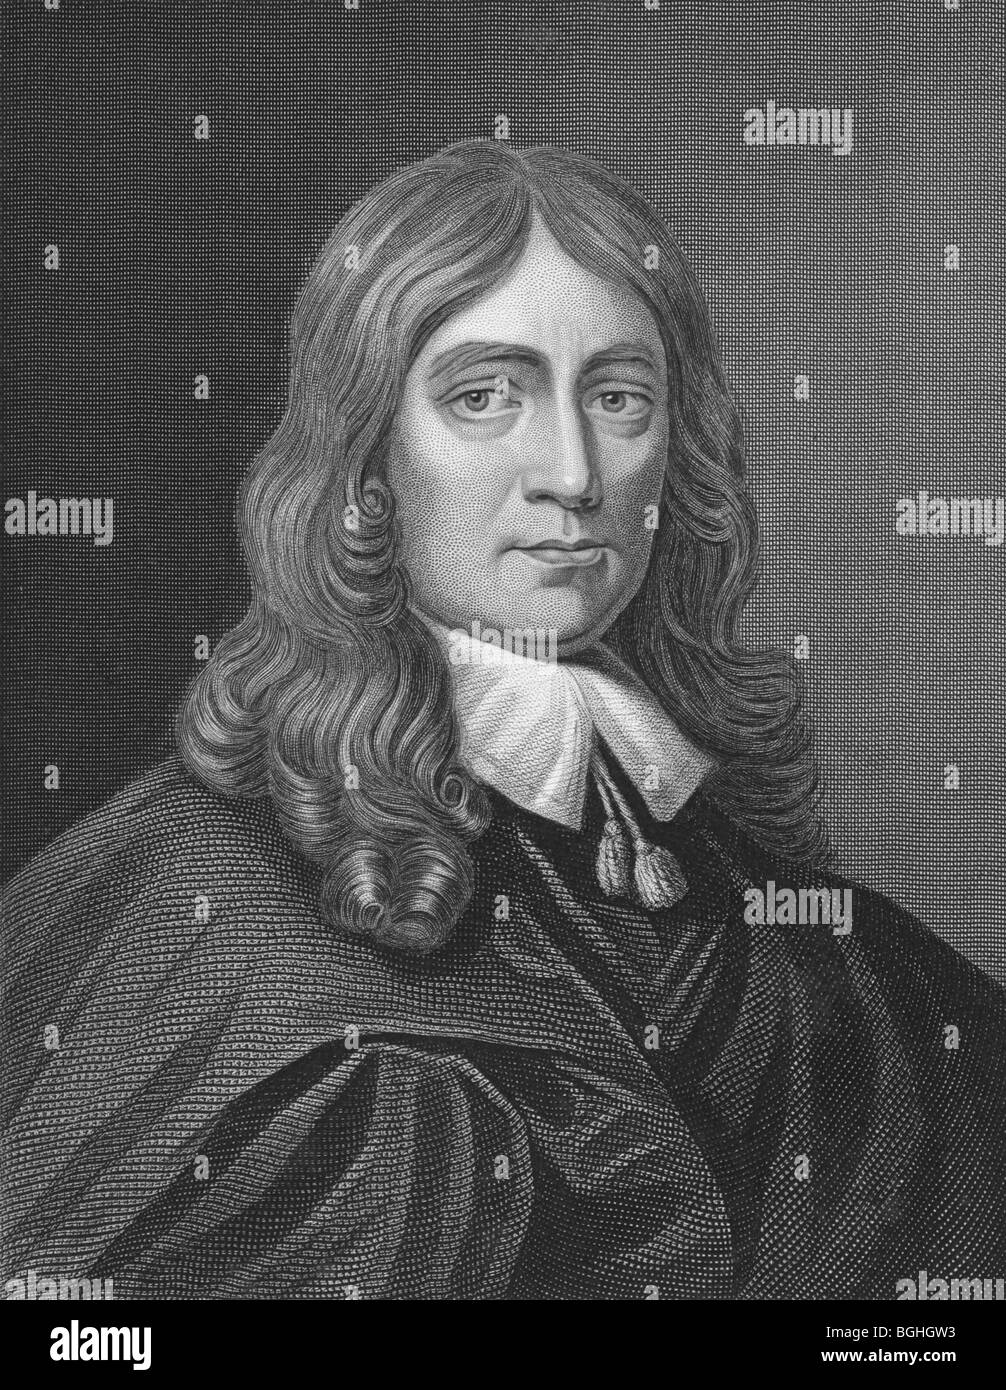 John Milton on engraving from the 1850s. English poet, author, polemicist and civil servant for the commonwealth of England. Stock Photo